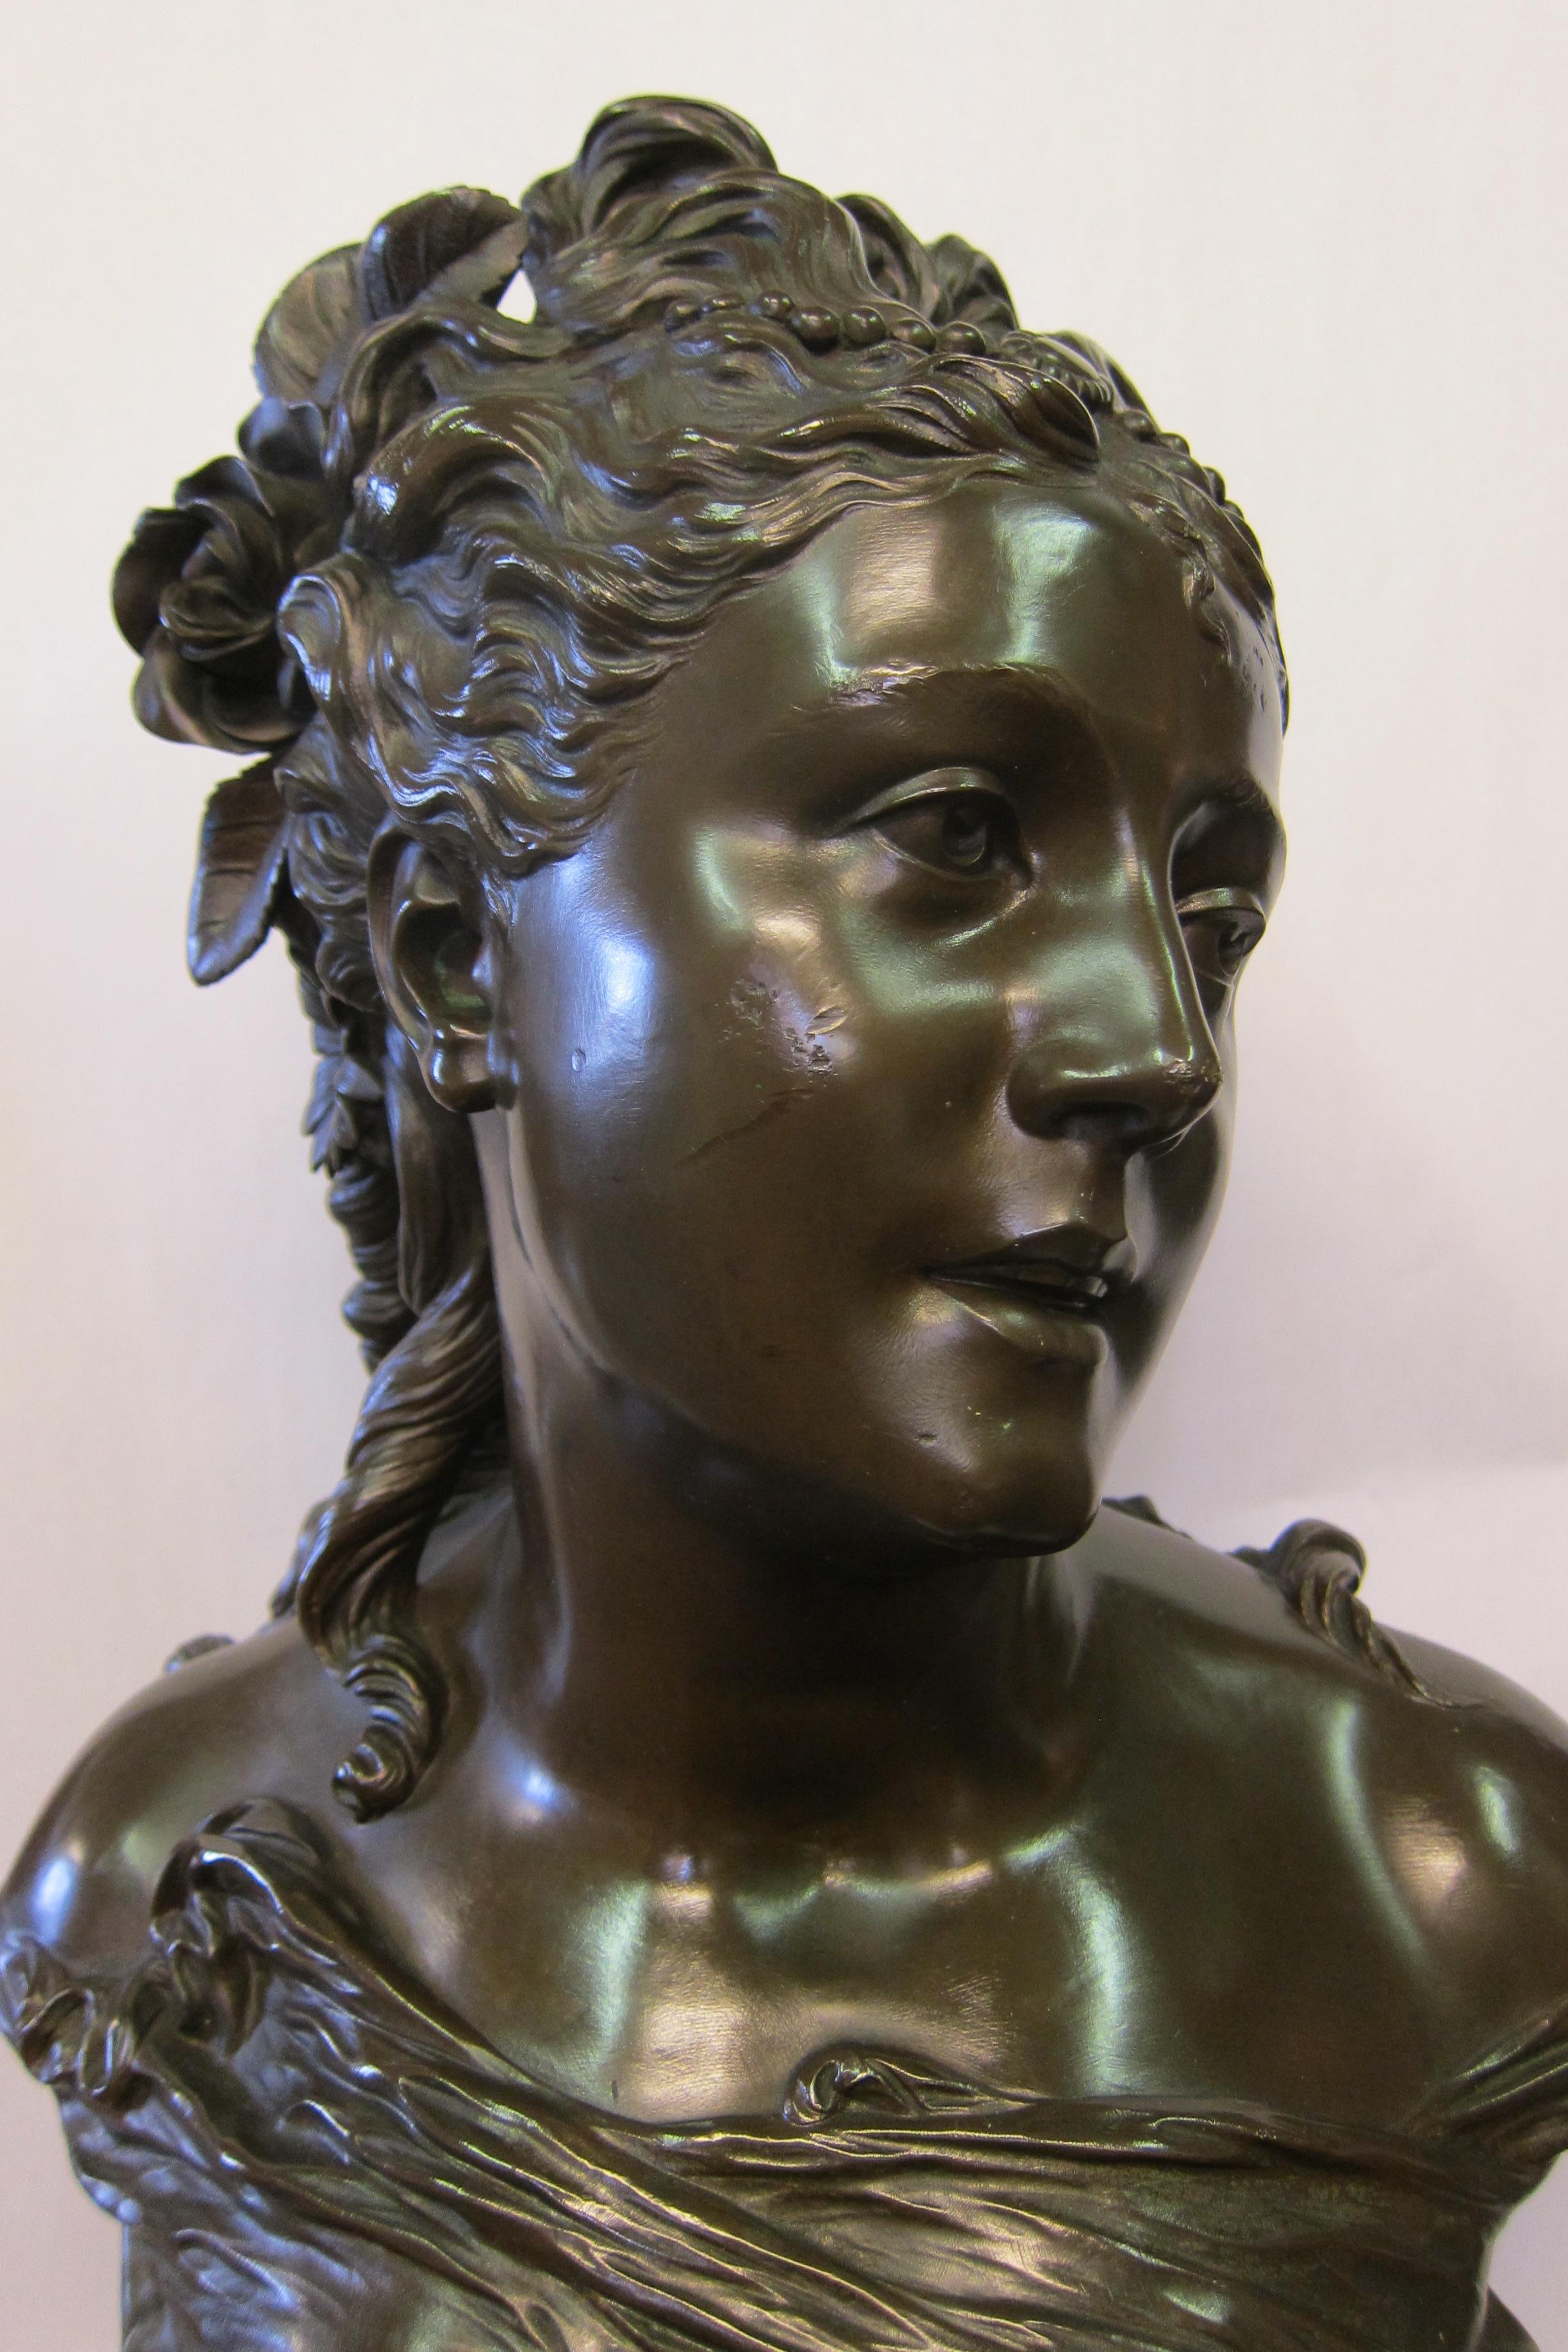 This vintage, circa 1890, patinated bronze sculpture depicts a wonderfully detailed bust of a beautiful lady adorned with stunning flowers in her hair. The artist, Pierre Louis Detrier (1822-1897), showcases his subject with precise, sharp details.